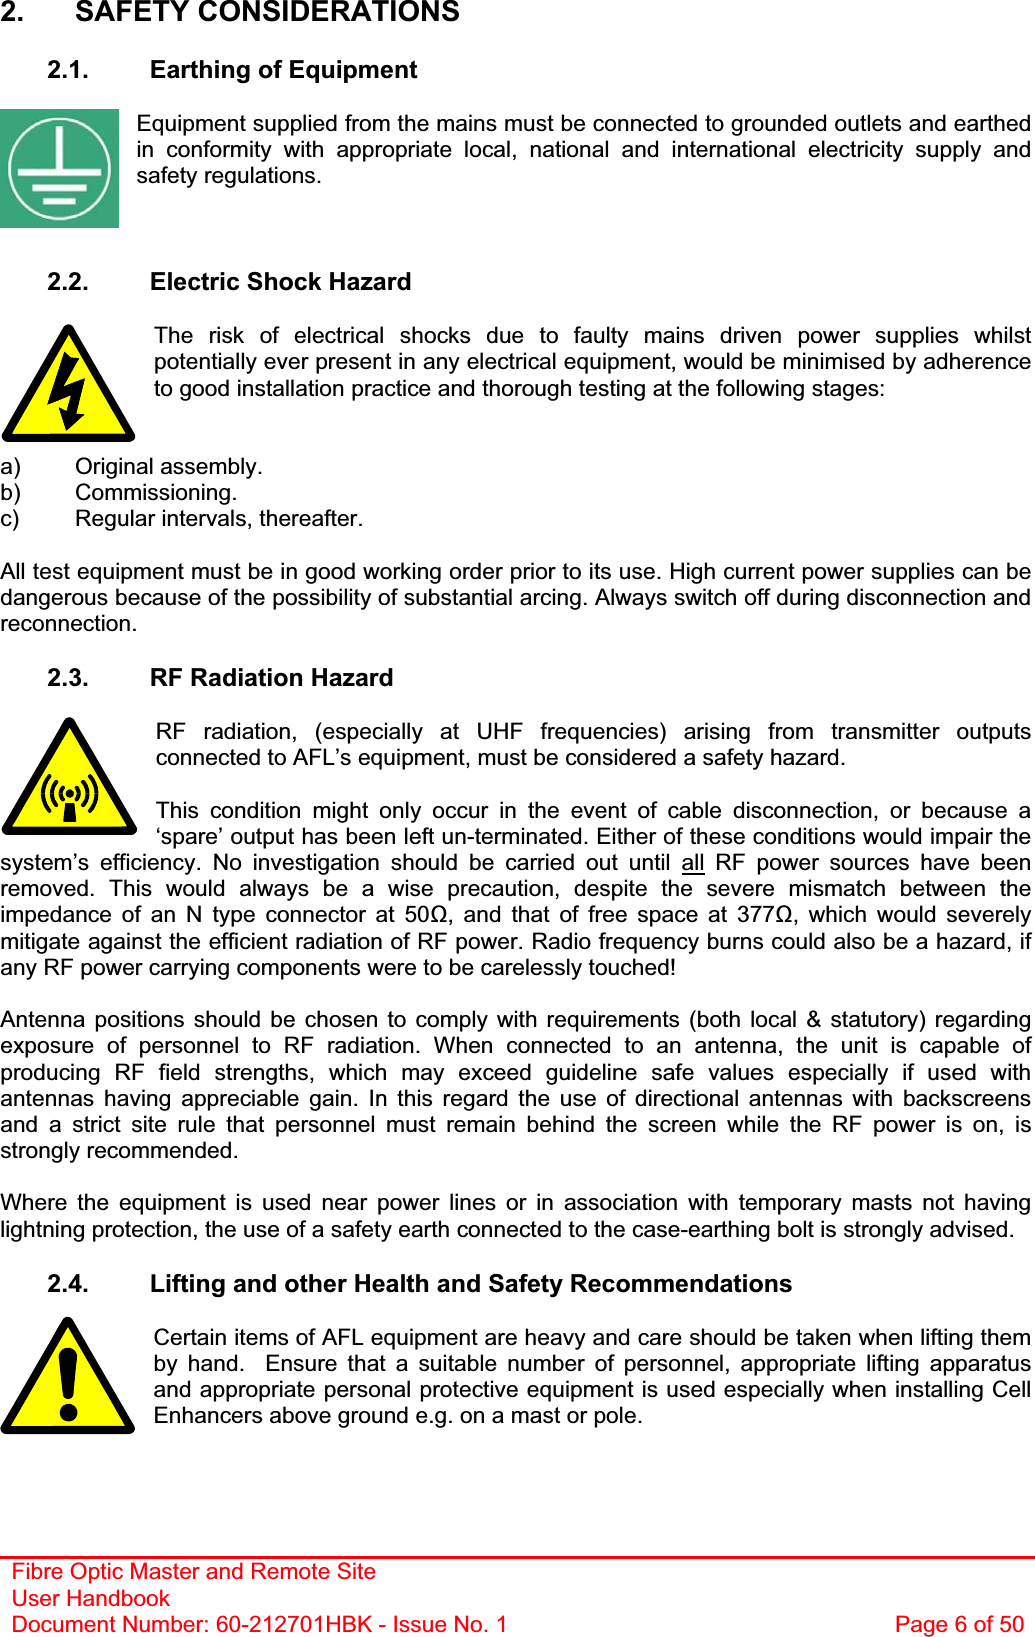 Fibre Optic Master and Remote Site User Handbook Document Number: 60-212701HBK - Issue No. 1  Page 6 of 502. SAFETY CONSIDERATIONS 2.1.  Earthing of Equipment Equipment supplied from the mains must be connected to grounded outlets and earthed in conformity with appropriate local, national and international electricity supply and safety regulations. 2.2.  Electric Shock Hazard The risk of electrical shocks due to faulty mains driven power supplies whilst potentially ever present in any electrical equipment, would be minimised by adherence to good installation practice and thorough testing at the following stages: a) Original assembly. b) Commissioning. c)  Regular intervals, thereafter. All test equipment must be in good working order prior to its use. High current power supplies can be dangerous because of the possibility of substantial arcing. Always switch off during disconnection and reconnection.2.3.  RF Radiation Hazard RF radiation, (especially at UHF frequencies) arising from transmitter outputs connected to AFL’s equipment, must be considered a safety hazard. This condition might only occur in the event of cable disconnection, or because a ‘spare’ output has been left un-terminated. Either of these conditions would impair the system’s efficiency. No investigation should be carried out until all RF power sources have been removed. This would always be a wise precaution, despite the severe mismatch between the impedance of an N type connector at 50, and that of free space at 377, which would severely mitigate against the efficient radiation of RF power. Radio frequency burns could also be a hazard, if any RF power carrying components were to be carelessly touched! Antenna positions should be chosen to comply with requirements (both local &amp; statutory) regarding exposure of personnel to RF radiation. When connected to an antenna, the unit is capable of producing RF field strengths, which may exceed guideline safe values especially if used with antennas having appreciable gain. In this regard the use of directional antennas with backscreens and a strict site rule that personnel must remain behind the screen while the RF power is on, is strongly recommended. Where the equipment is used near power lines or in association with temporary masts not having lightning protection, the use of a safety earth connected to the case-earthing bolt is strongly advised. 2.4.  Lifting and other Health and Safety Recommendations Certain items of AFL equipment are heavy and care should be taken when lifting them by hand.  Ensure that a suitable number of personnel, appropriate lifting apparatus and appropriate personal protective equipment is used especially when installing Cell Enhancers above ground e.g. on a mast or pole.